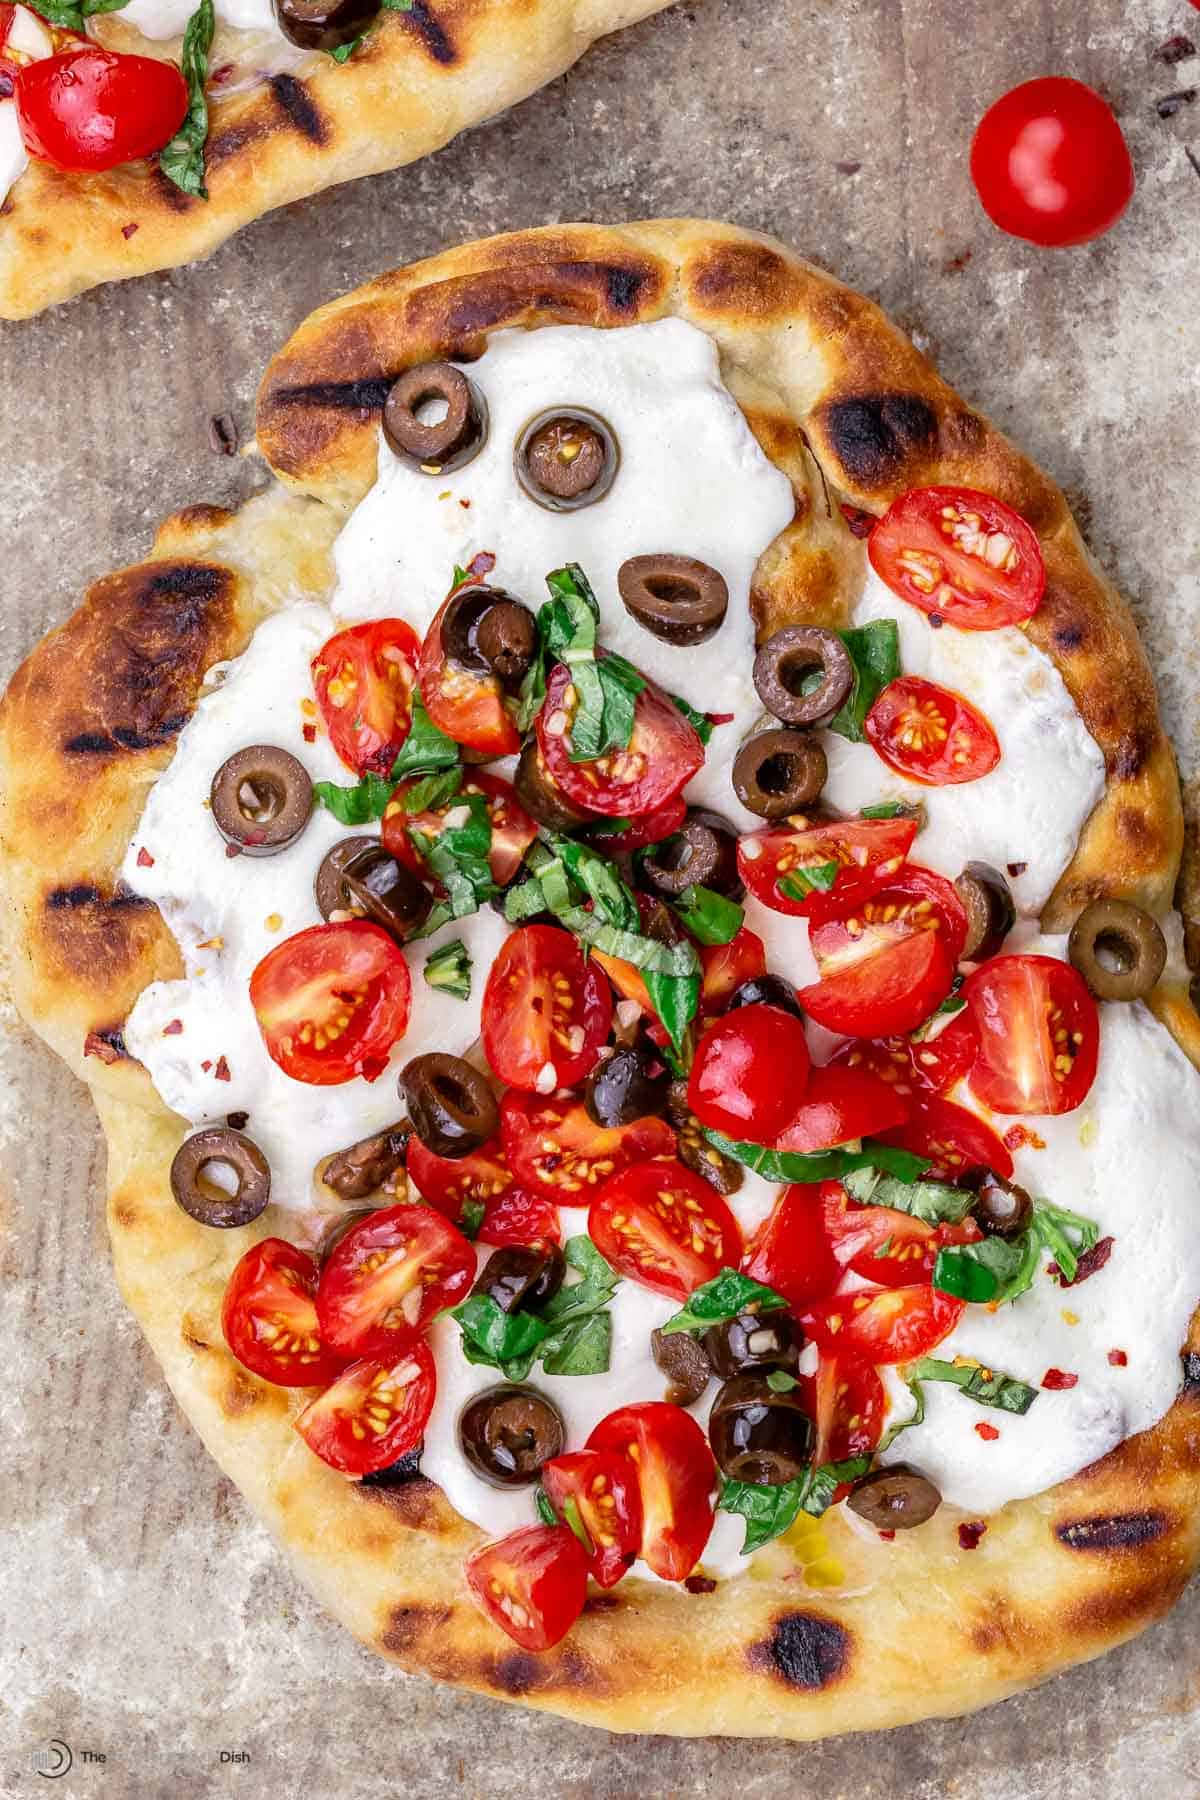 Decadent Delights: A Feast of Delectable Pizzas